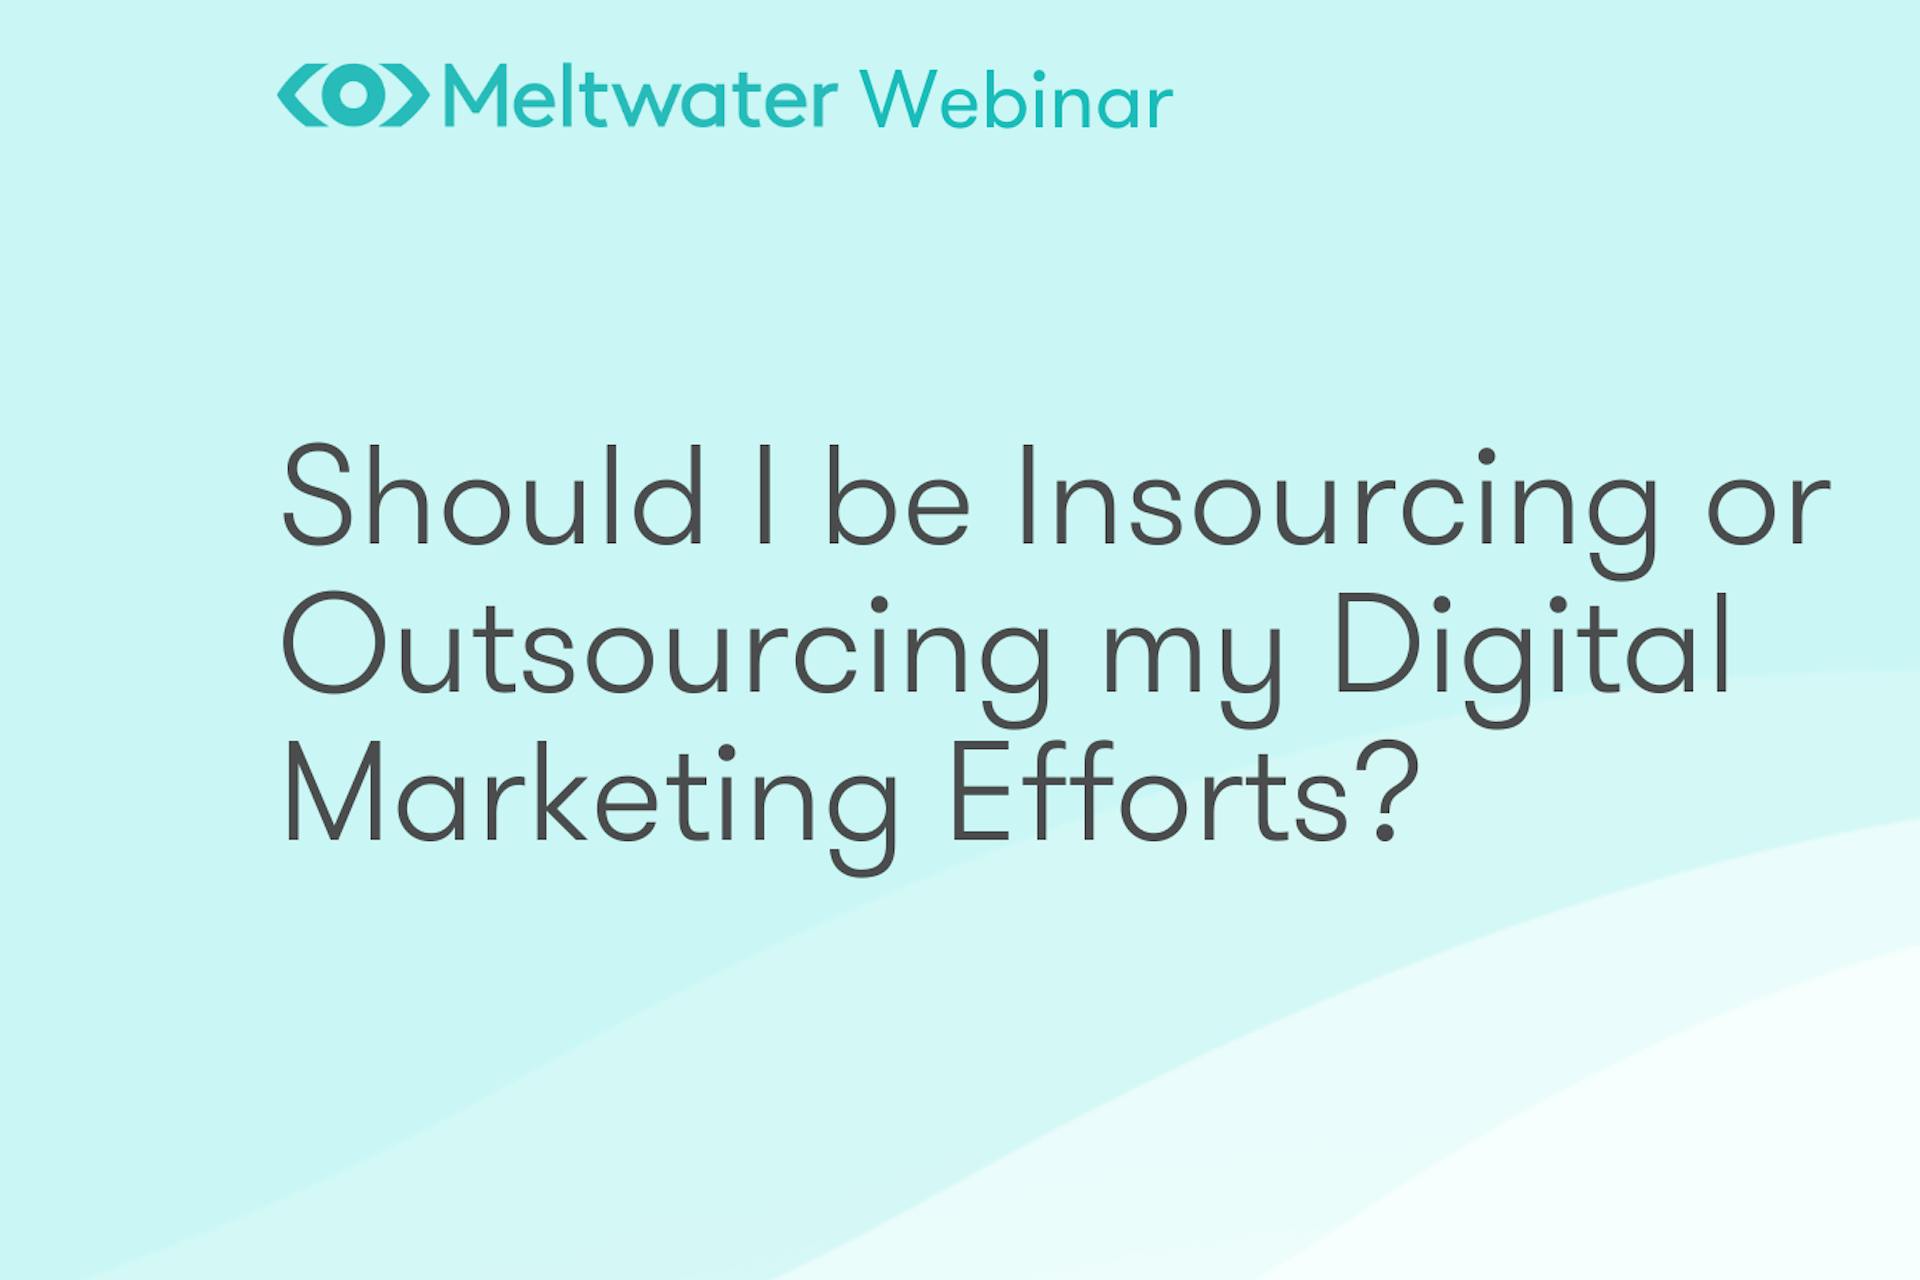 Should I be insourcing or outsourcing my digital marketing efforts?